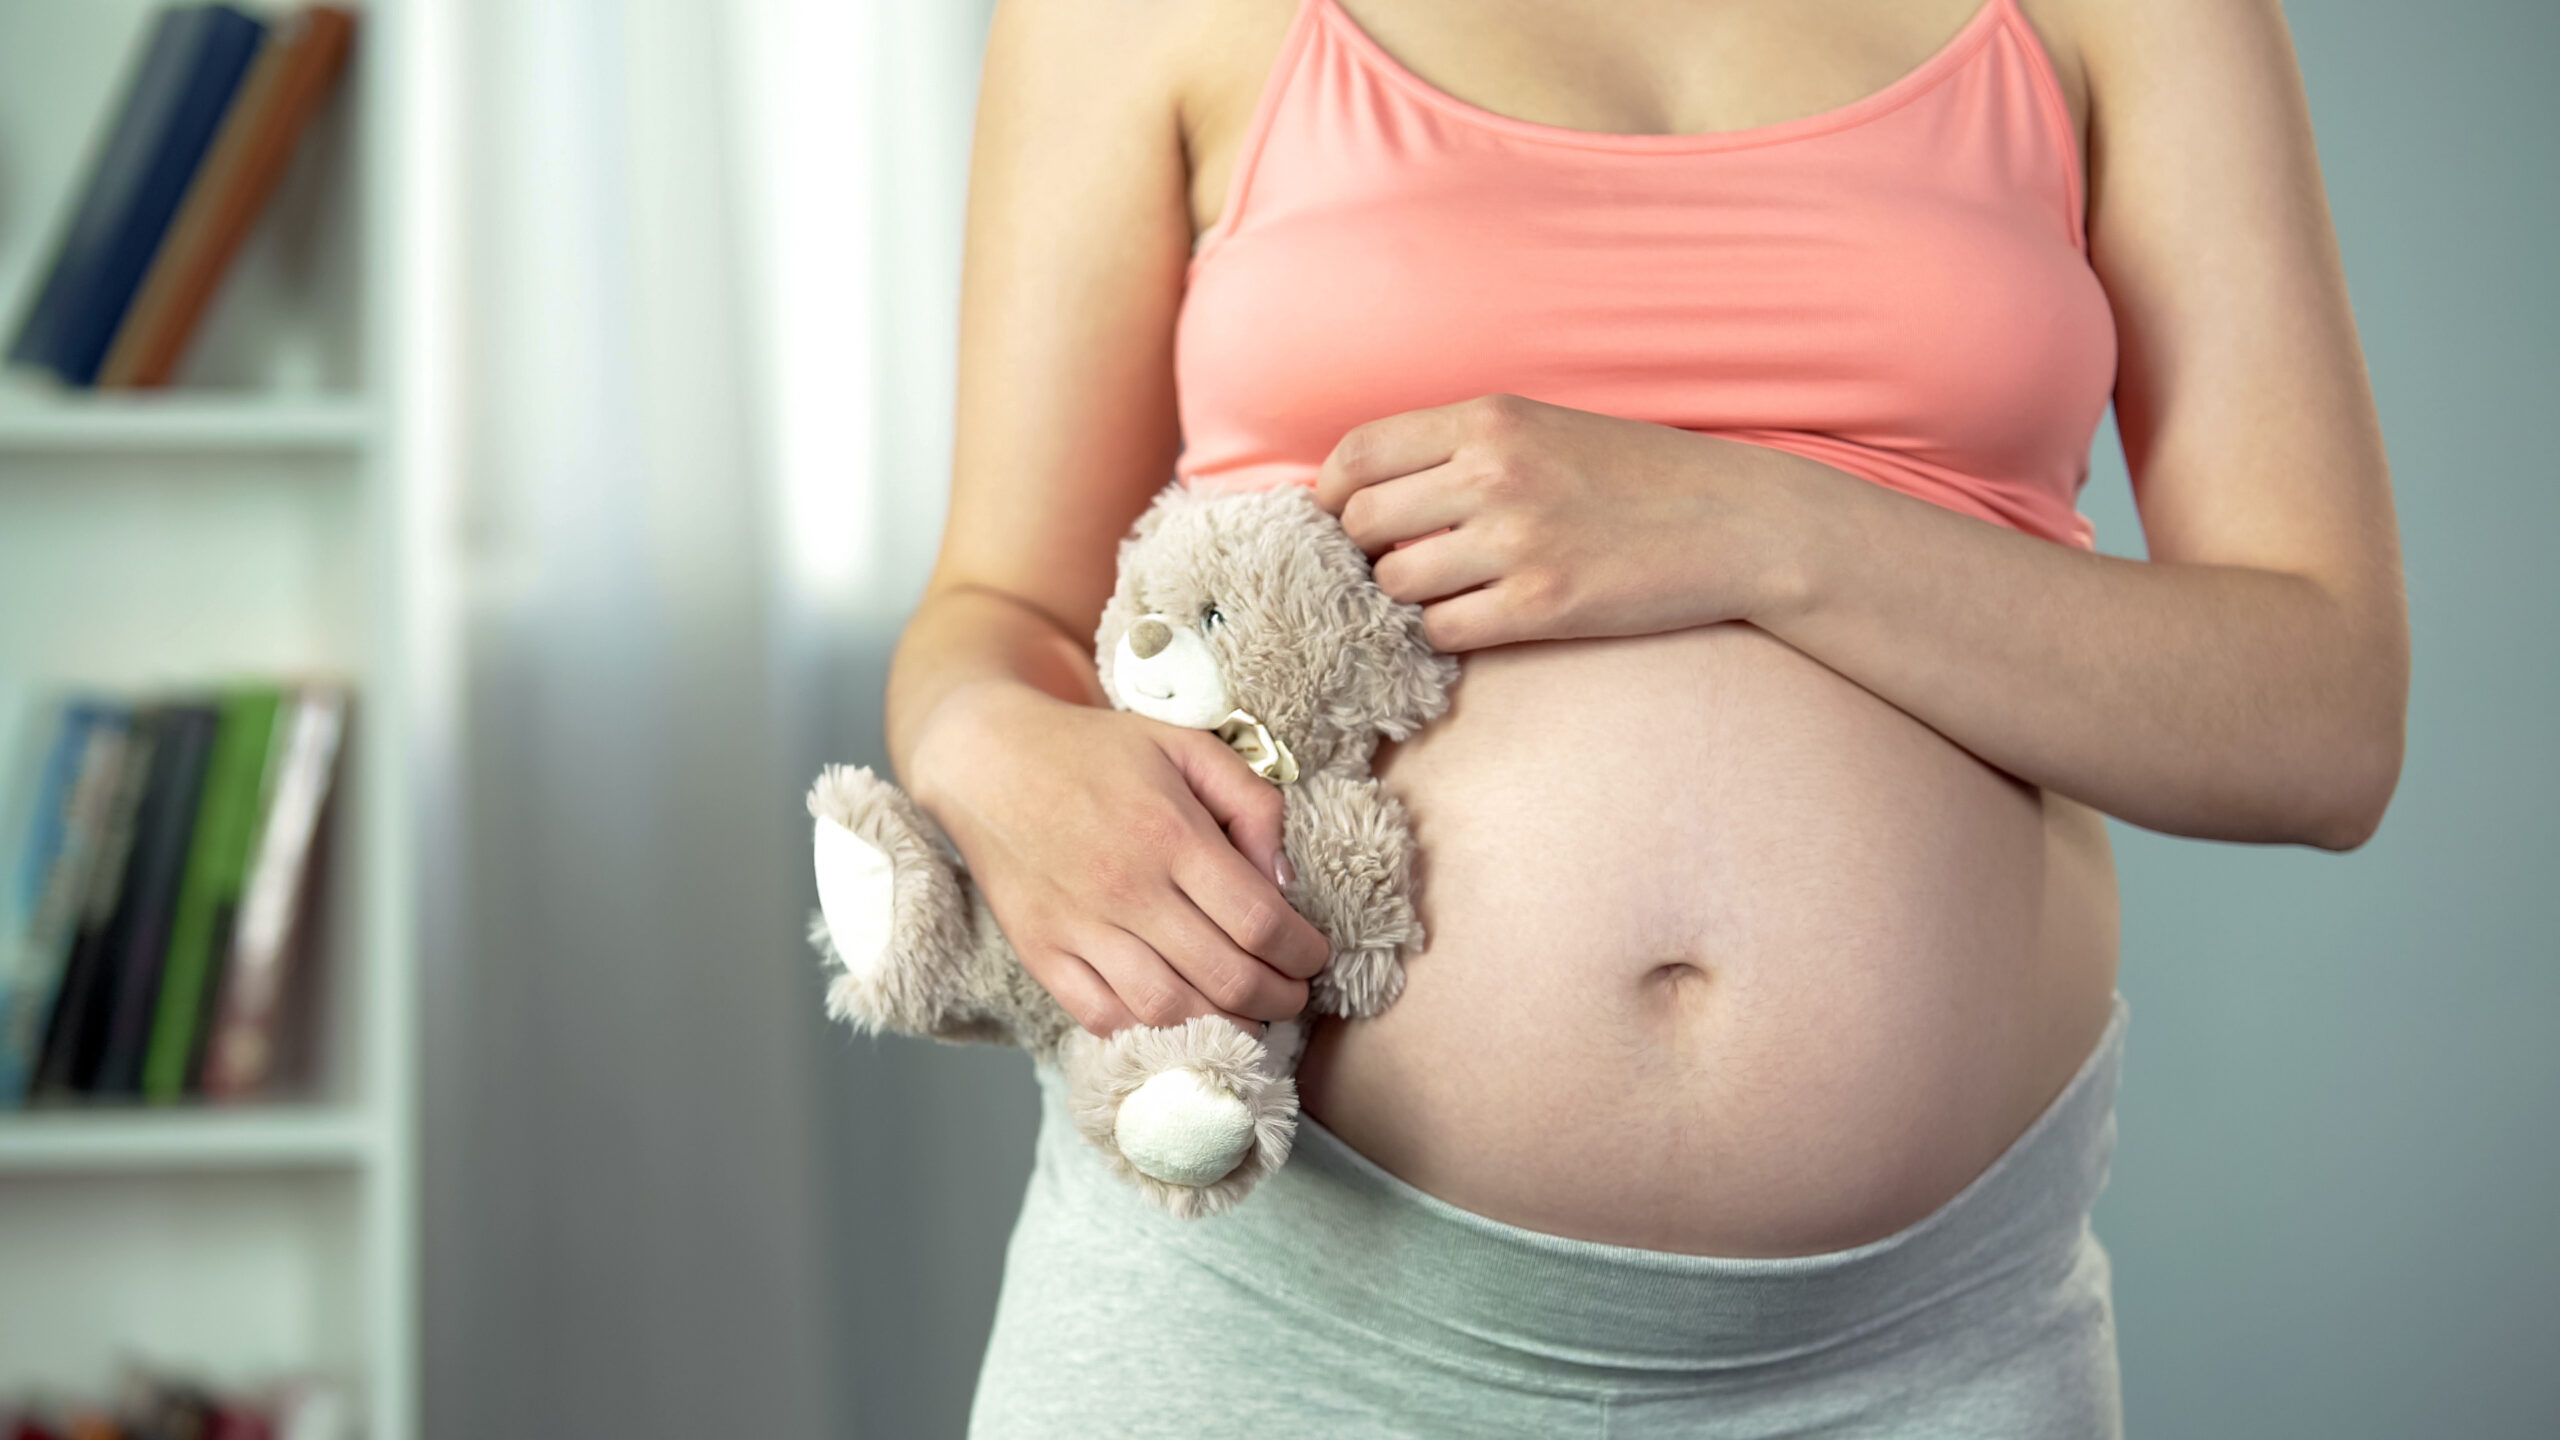 A pregnant woman wearing a crop shirt with her belly showing holds a teddy bear to her side.